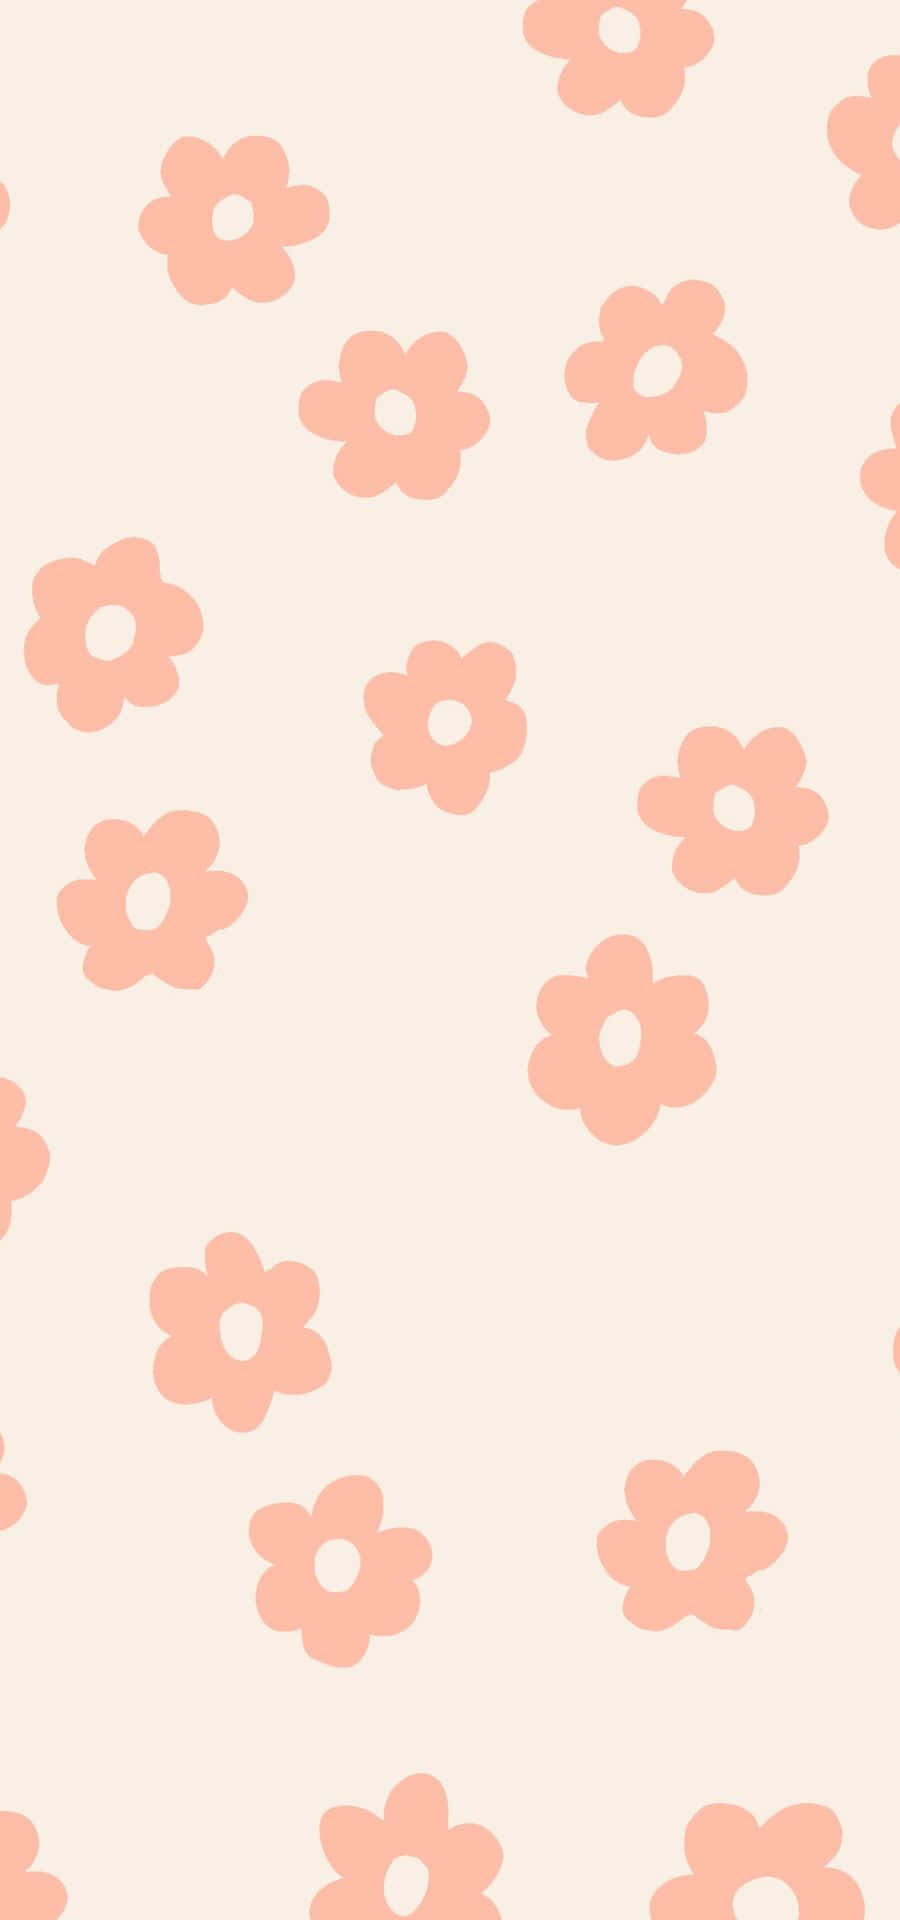 [100+] Peach Color Backgrounds | Wallpapers.com